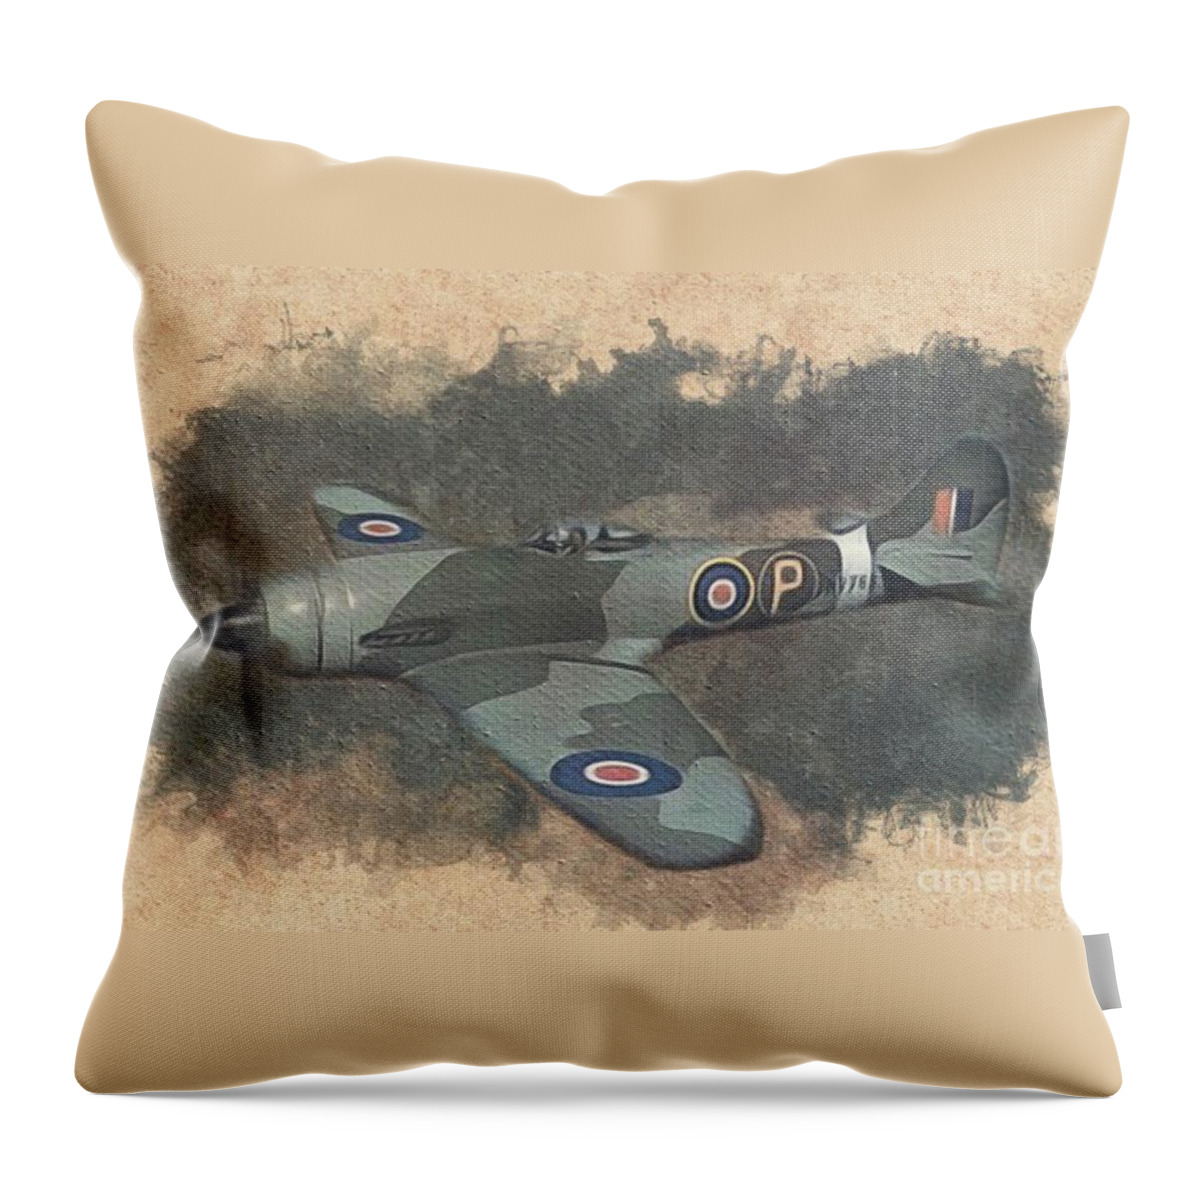 Spitfire Throw Pillow featuring the painting Hawker Tempest Fighter by Esoterica Art Agency